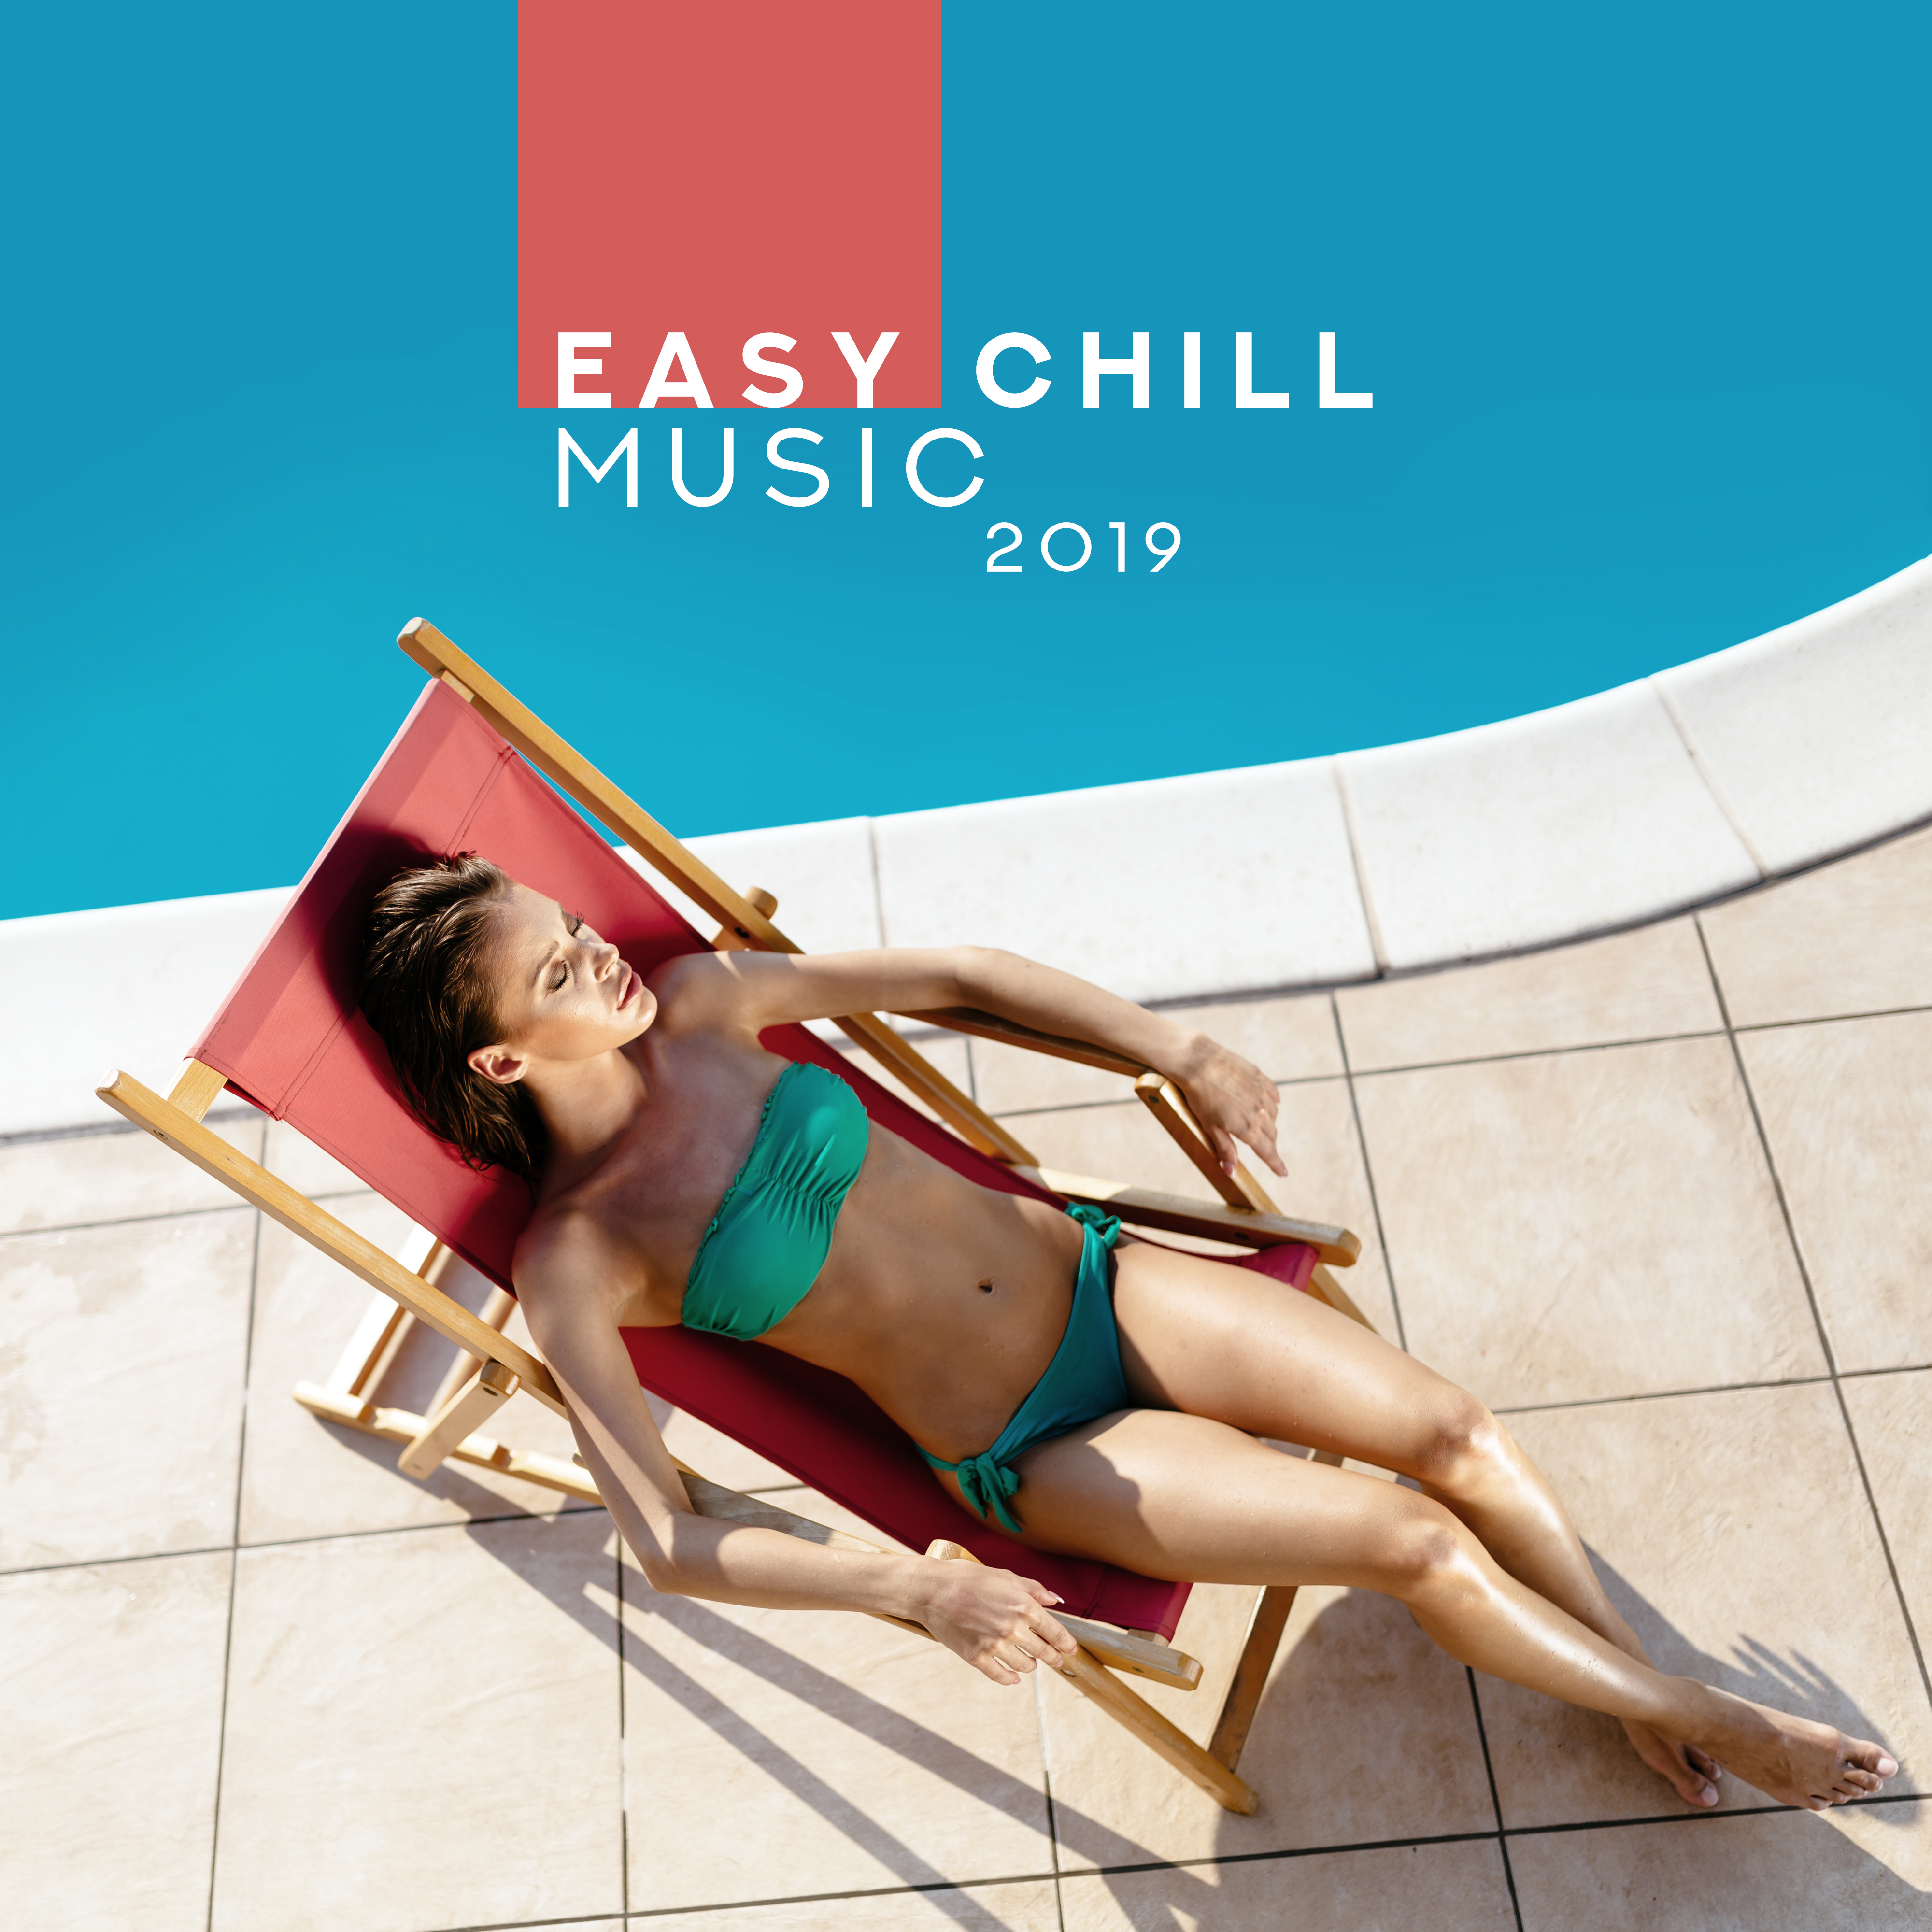 Easy Chill Music 2019 – Chillout Vibes Hot Compilation